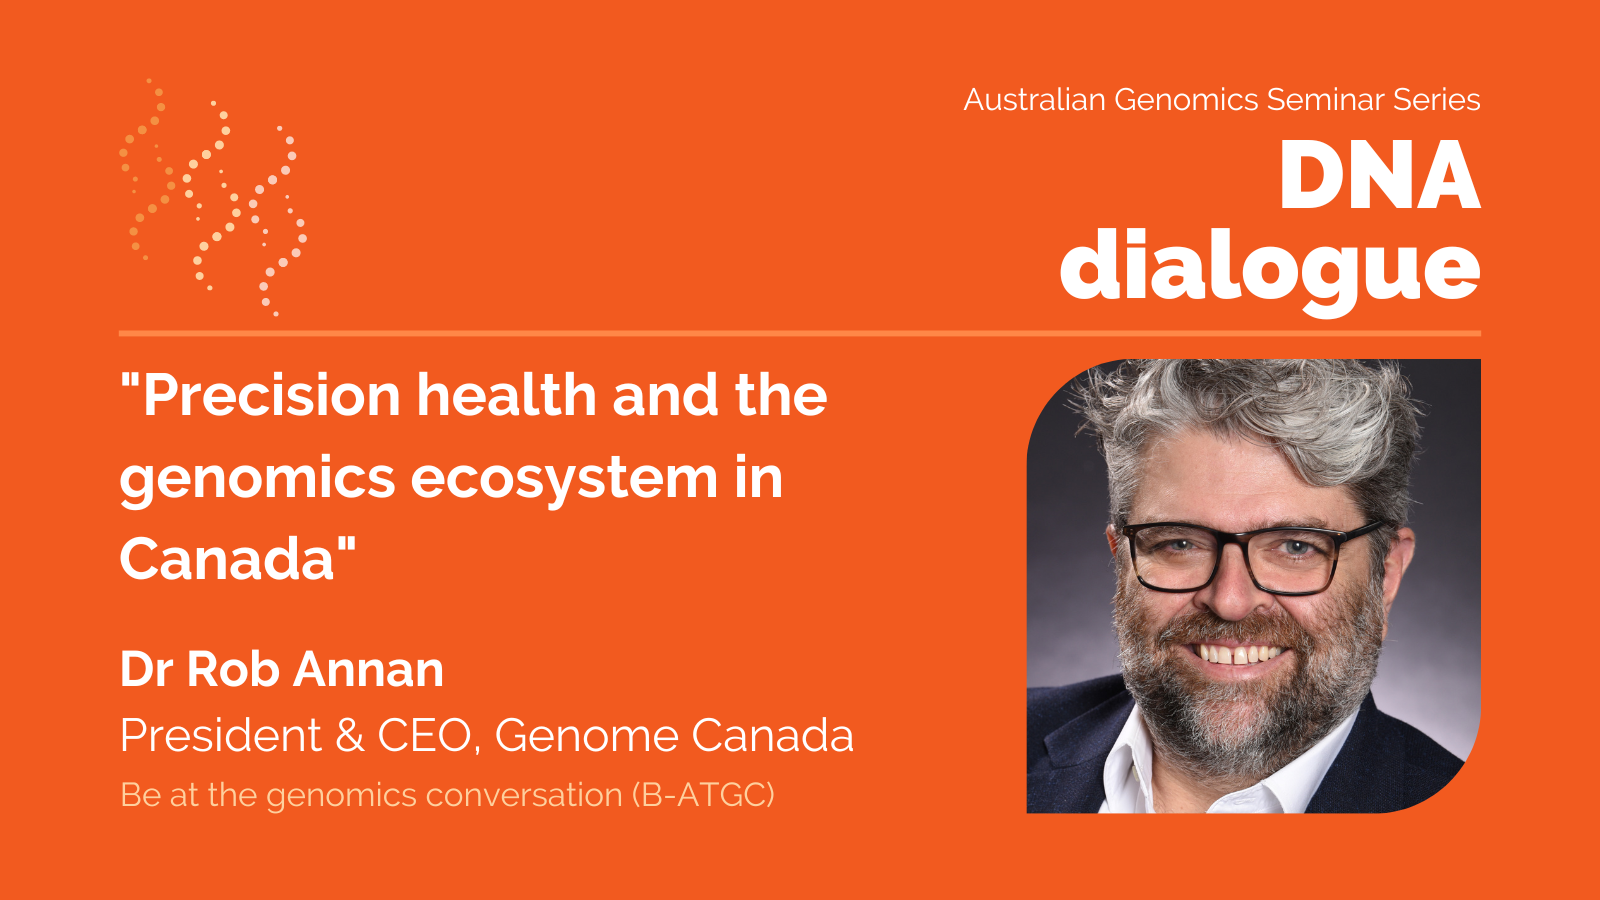 August DNA dialogue with Dr Rob Annan, Genome Canada